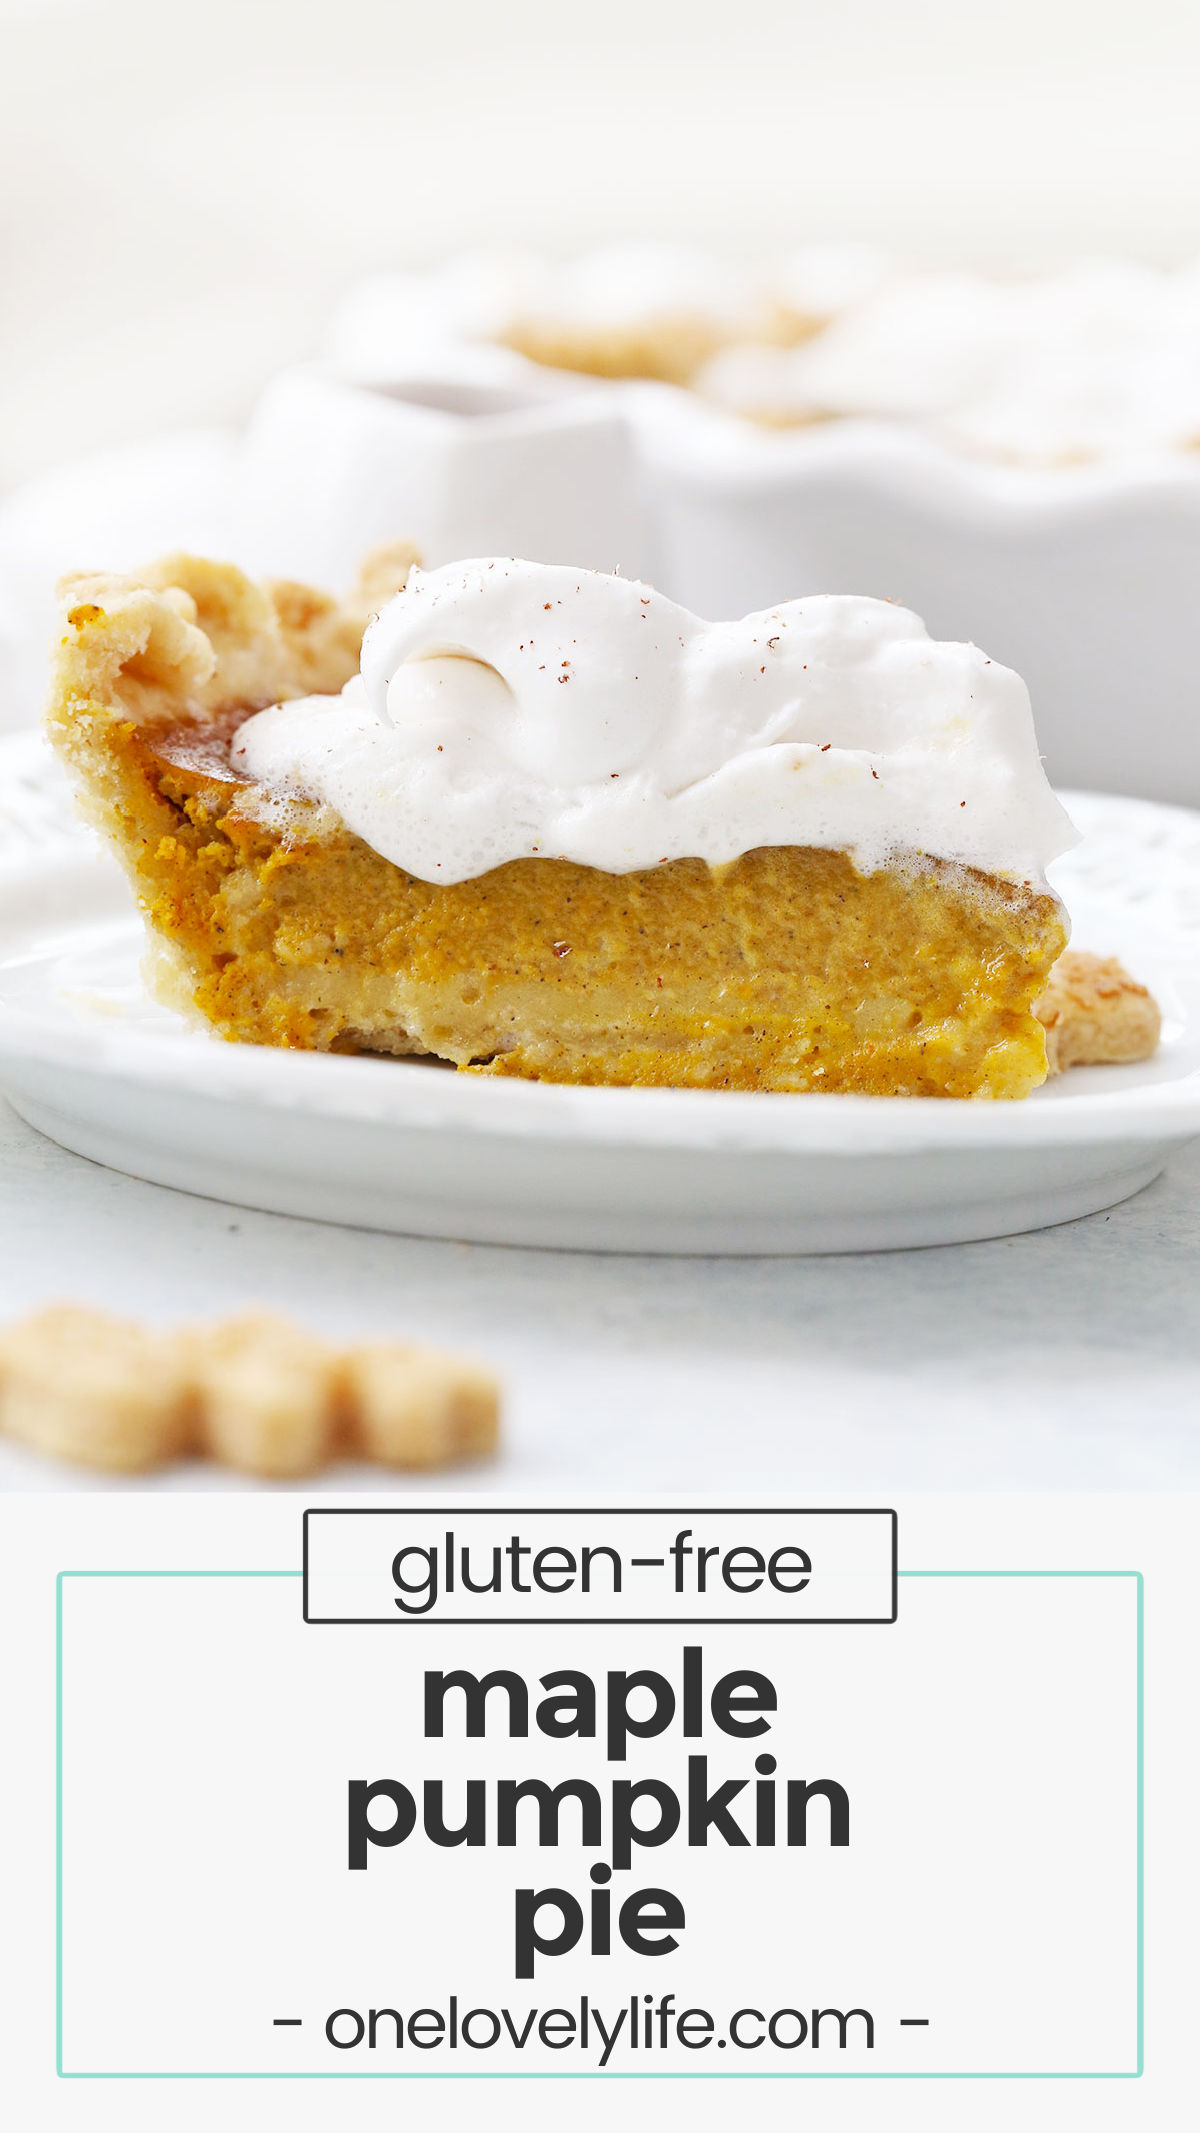 Maple Pumpkin Pie - This naturally sweetened pumpkin pie recipe might be the best pumpkin pie I've ever had. Perfectly spiced and so delicious! (Gluten free, dairy free, paleo-friendly) // paleo pumpkin pie recipe // dairy free pumpkin pie recipe // gluten free pumpkin pie recipe // healthy pumpkin pie